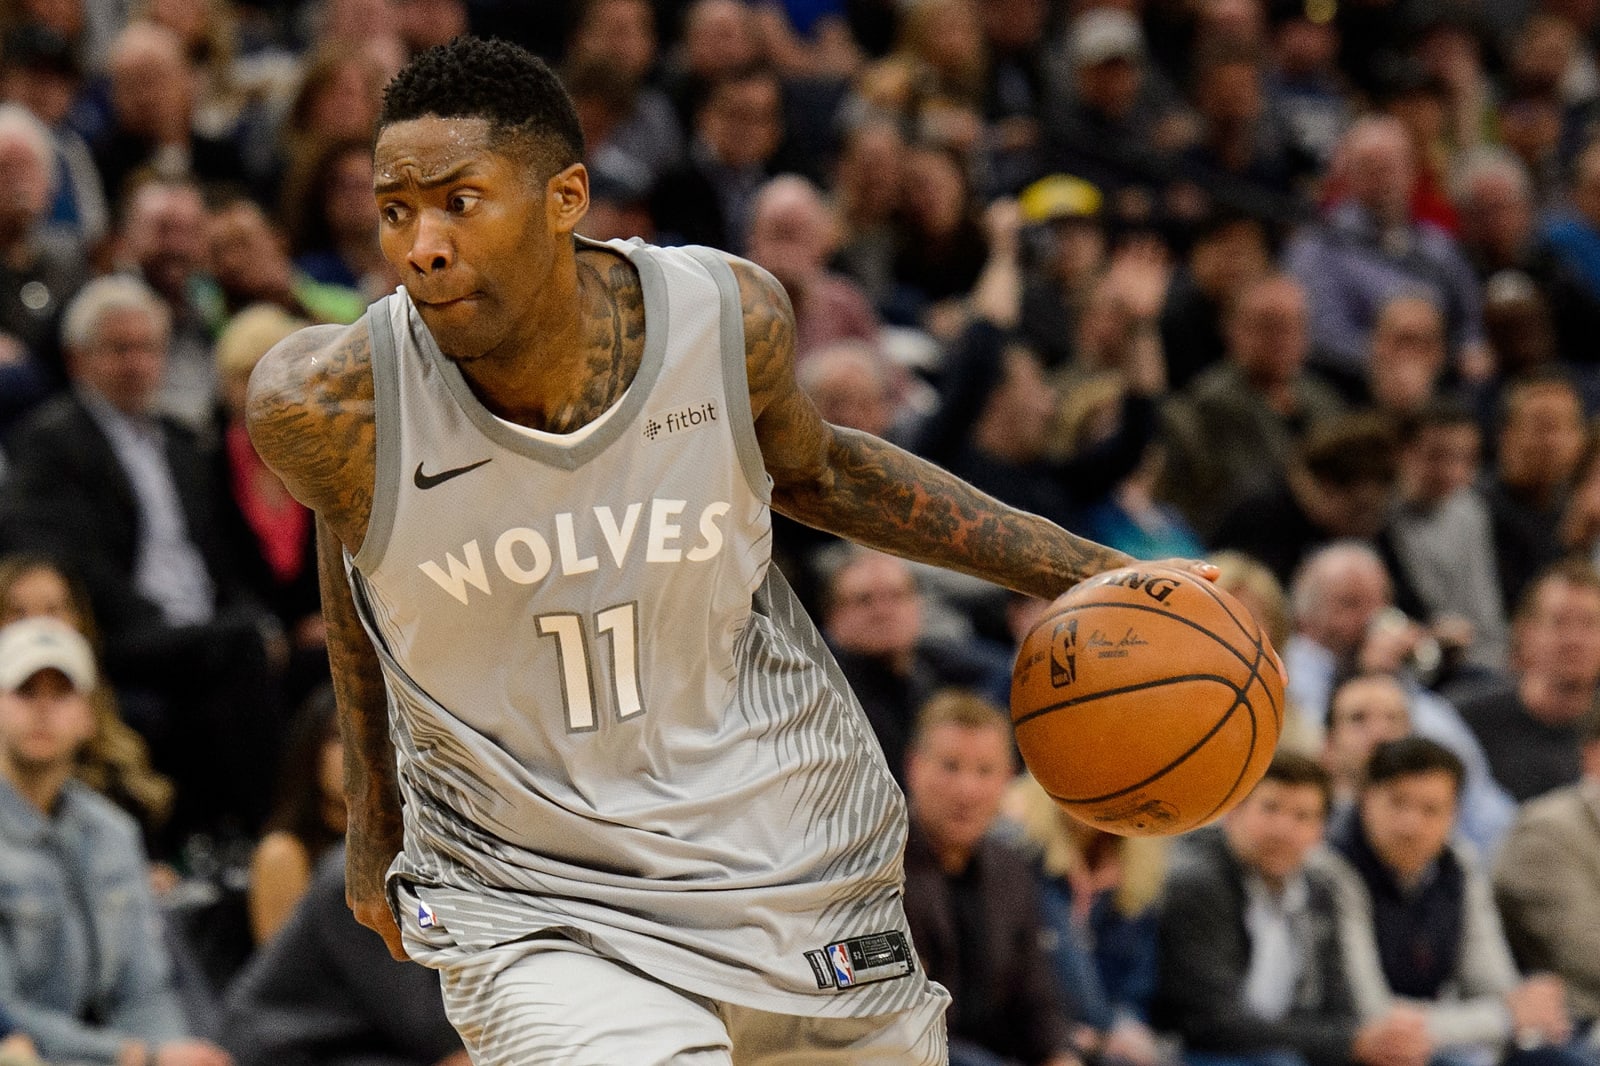 Jamal Crawford's looming exit adds even more pressure to Wolves' offseason  - The Athletic